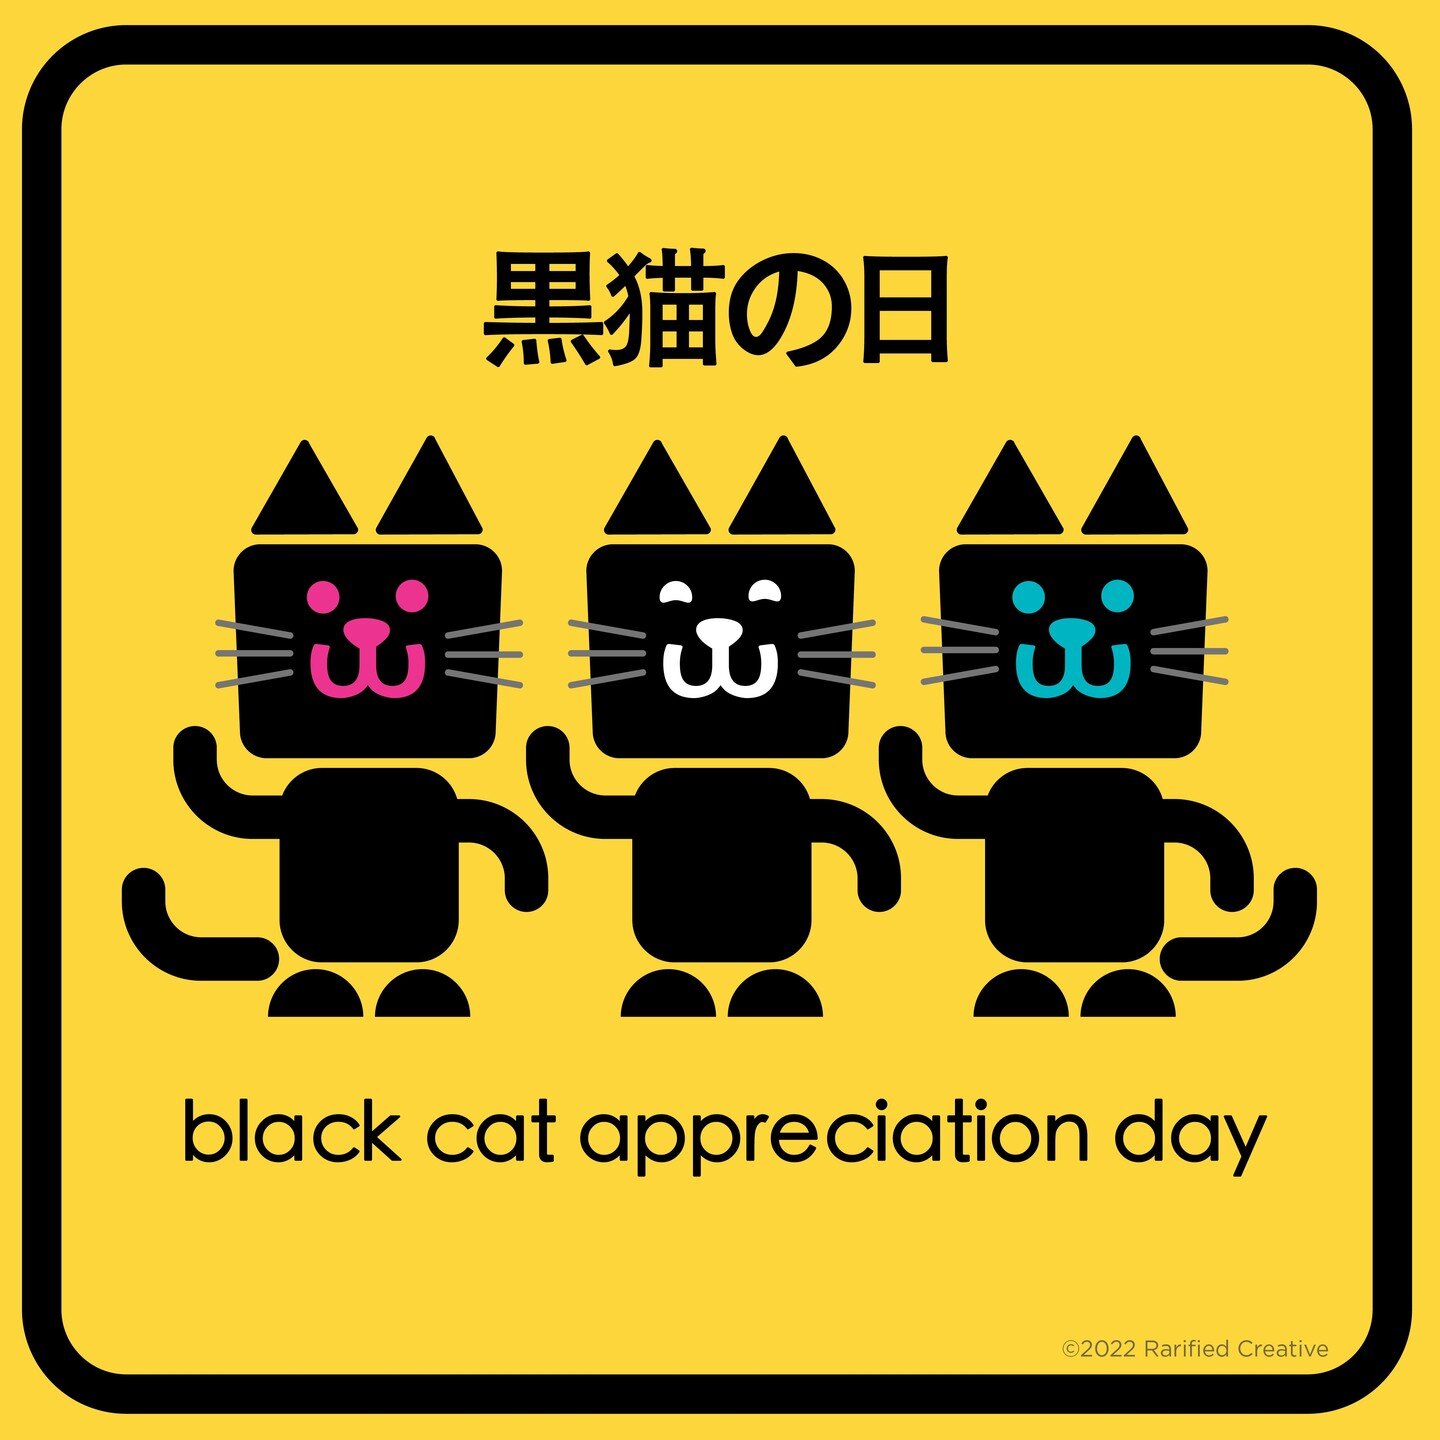 Let's paws for a mewment to celebrate the purrfectly wonderful kitties of the world on this &quot;Black Cat Appreciation Day.&quot; Soak up a neverending stream of sunshine today! #黒猫の日 #blackcat #blackcats #blackcatsrule #illustration